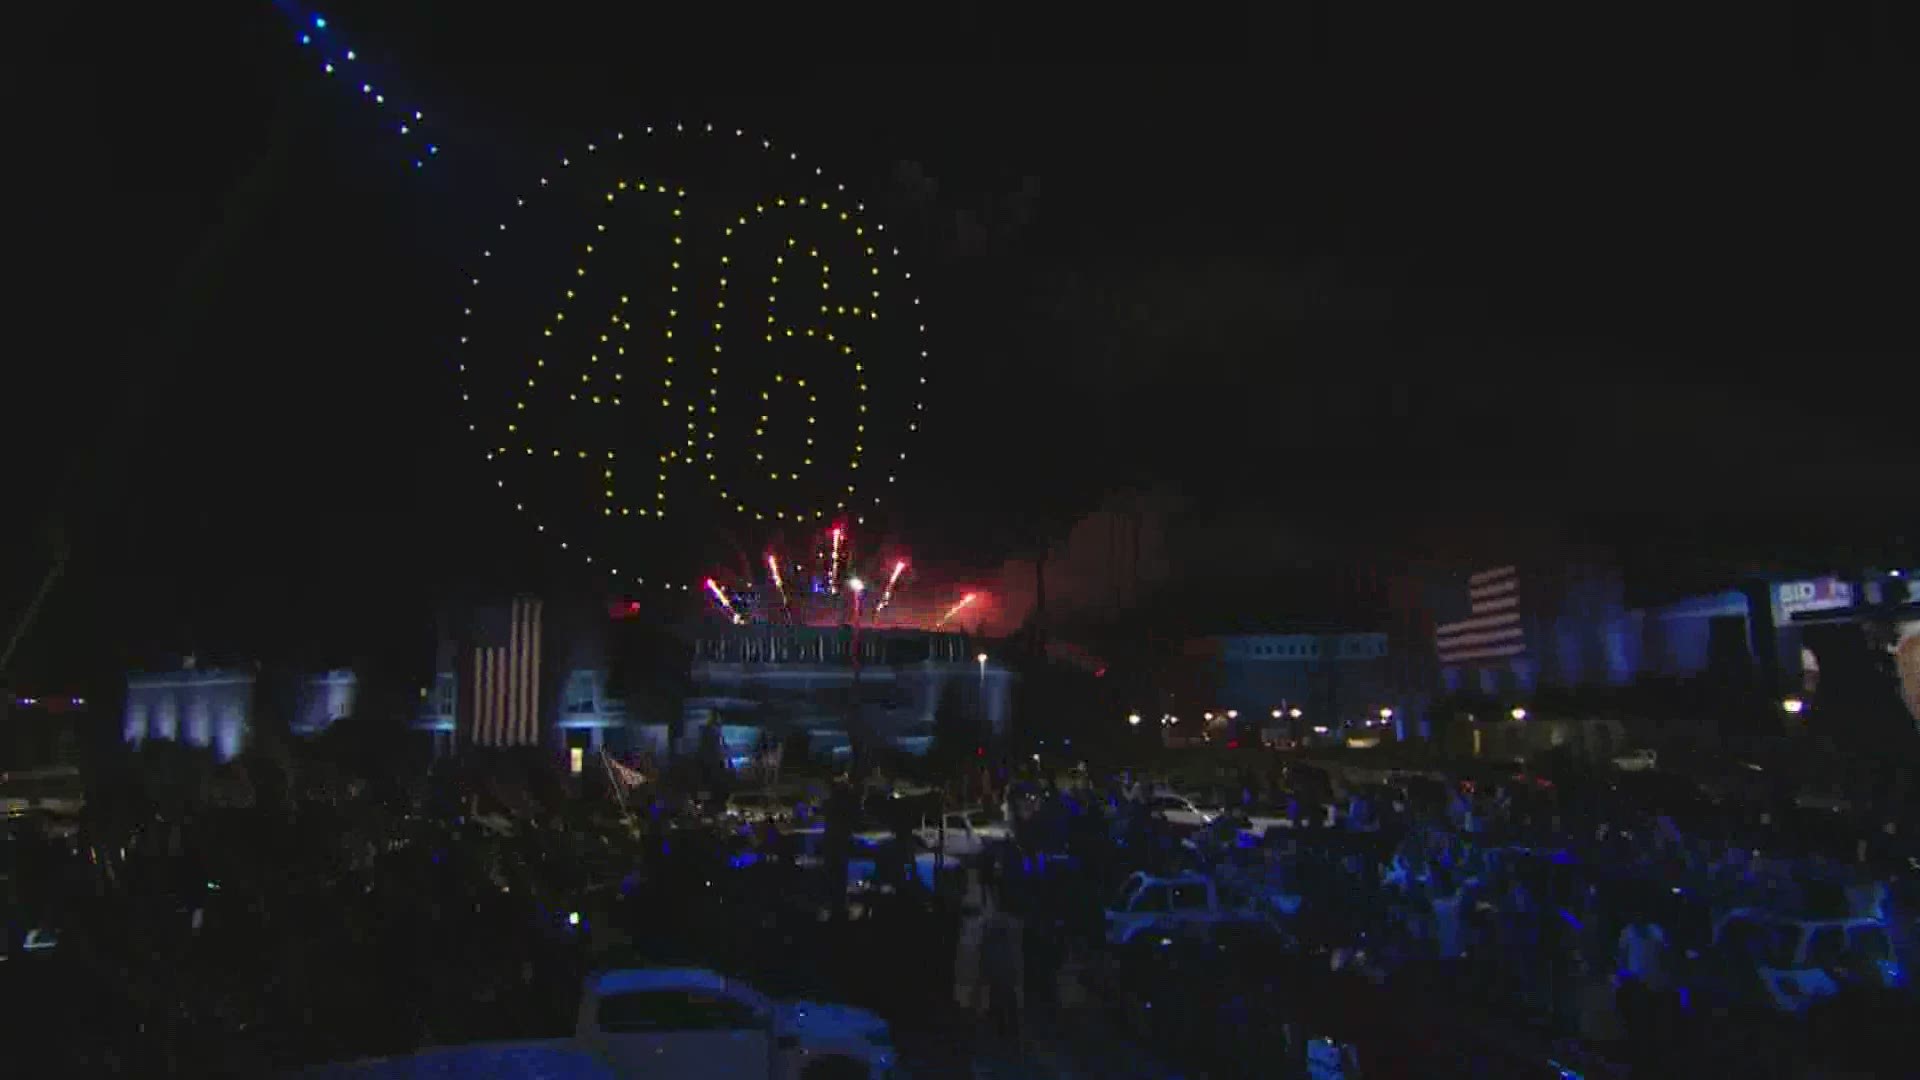 After Joe Biden's victory speech Saturday night, there was a fireworks and drone show featuring words like "President Elect" and "46."